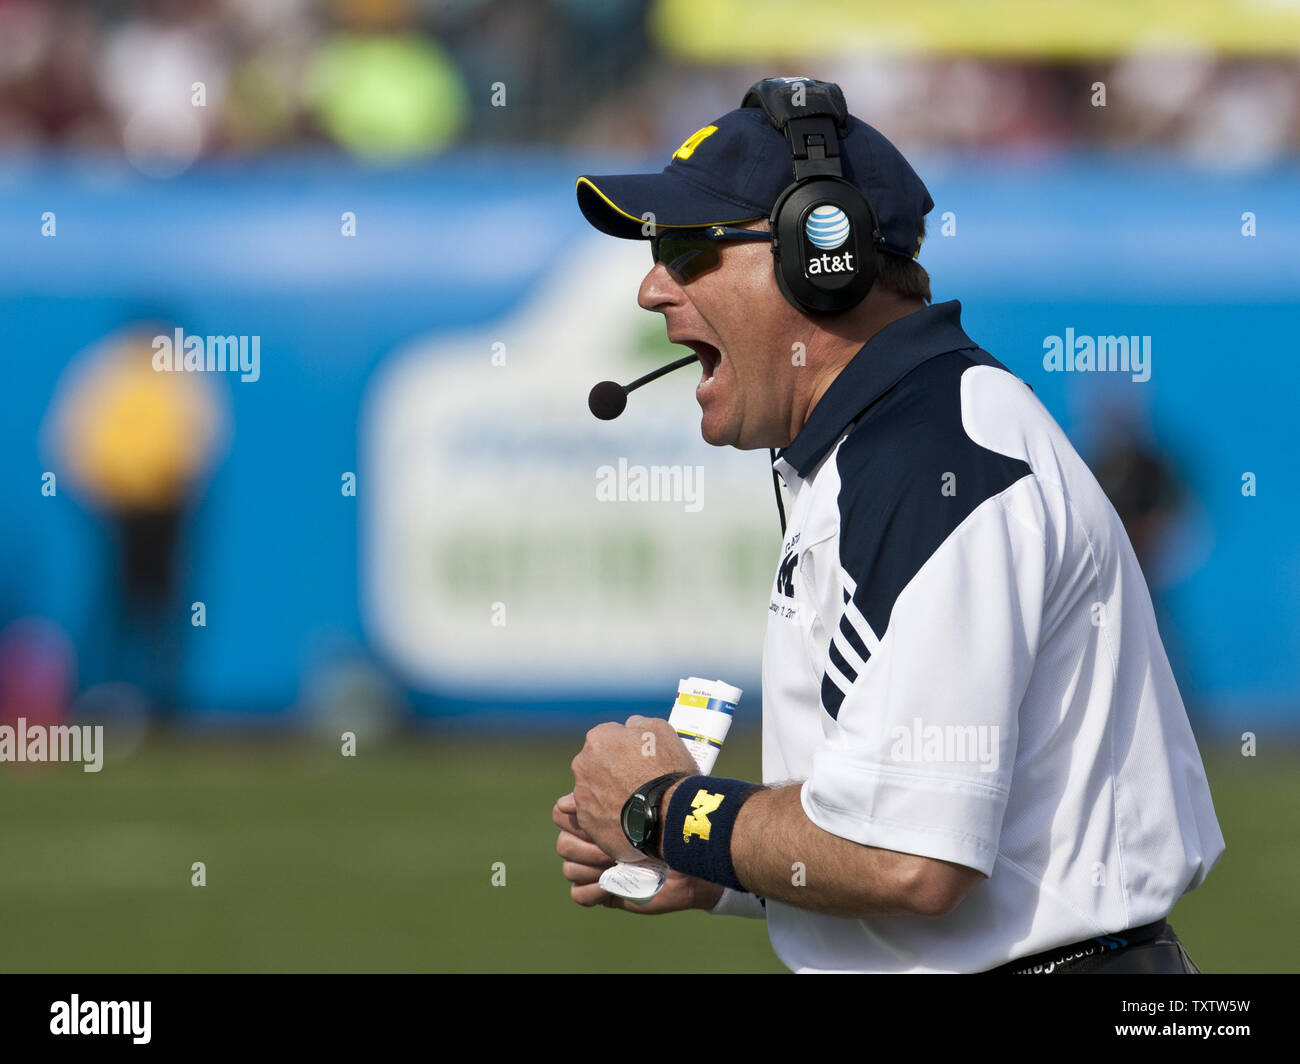 Michigan head coach Rich Rodriguez shouts instructions in the 1st half of their NCAA BCS bowl football game against Mississippi State at EverBank field in Jacksonville, Florida January 1, 2011.  UPI/Mark Wallheiser. Stock Photo